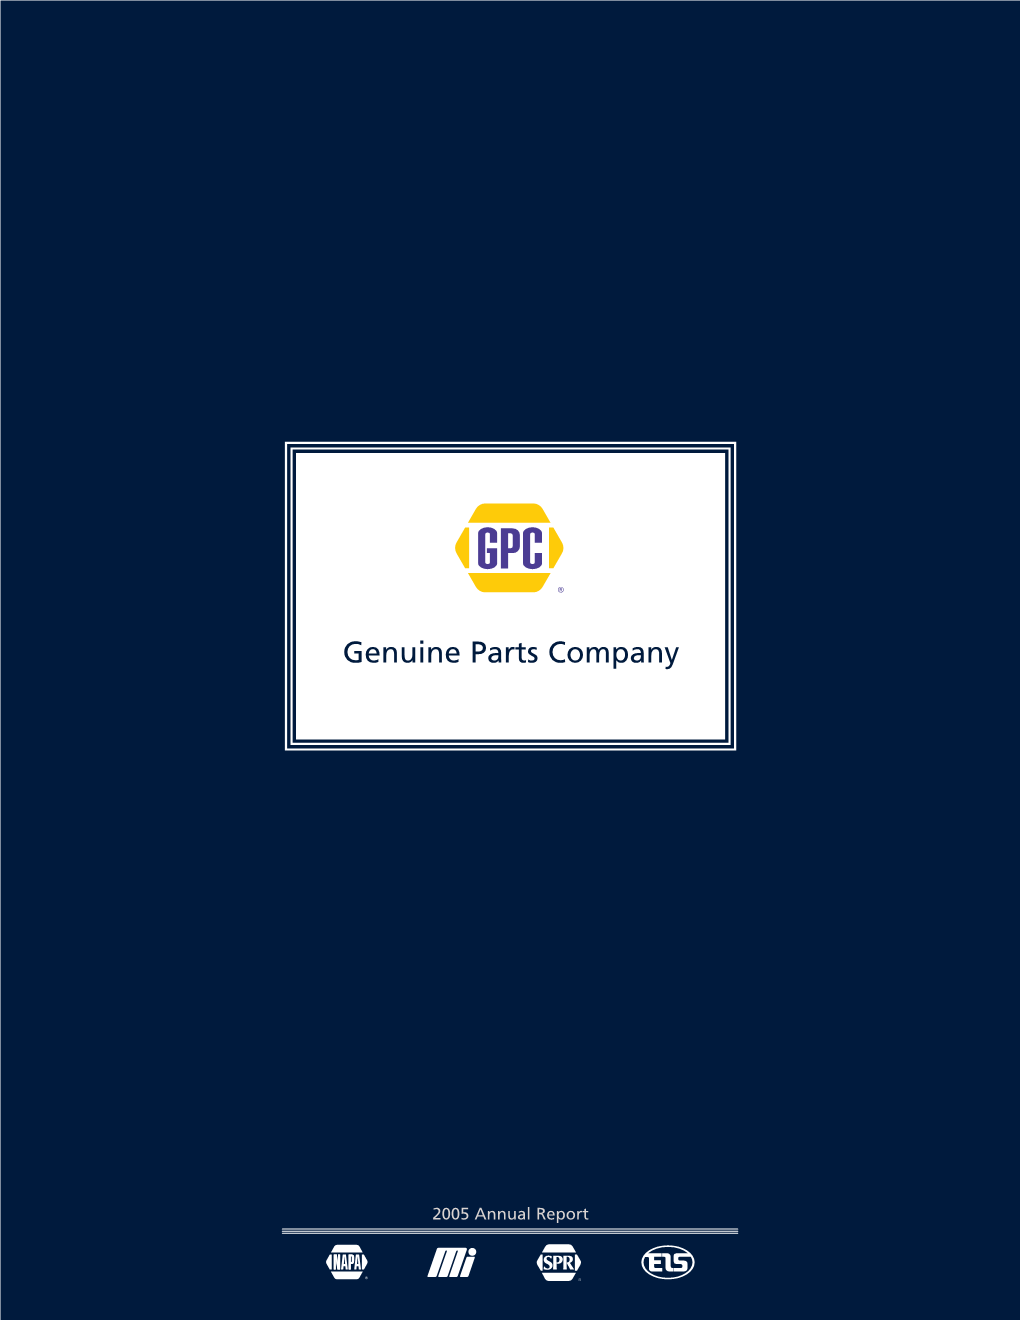 Automotive Parts Group, the Largest Division of GPC, Distributes Automotive Replacement Parts, Accessory Items and Service Items